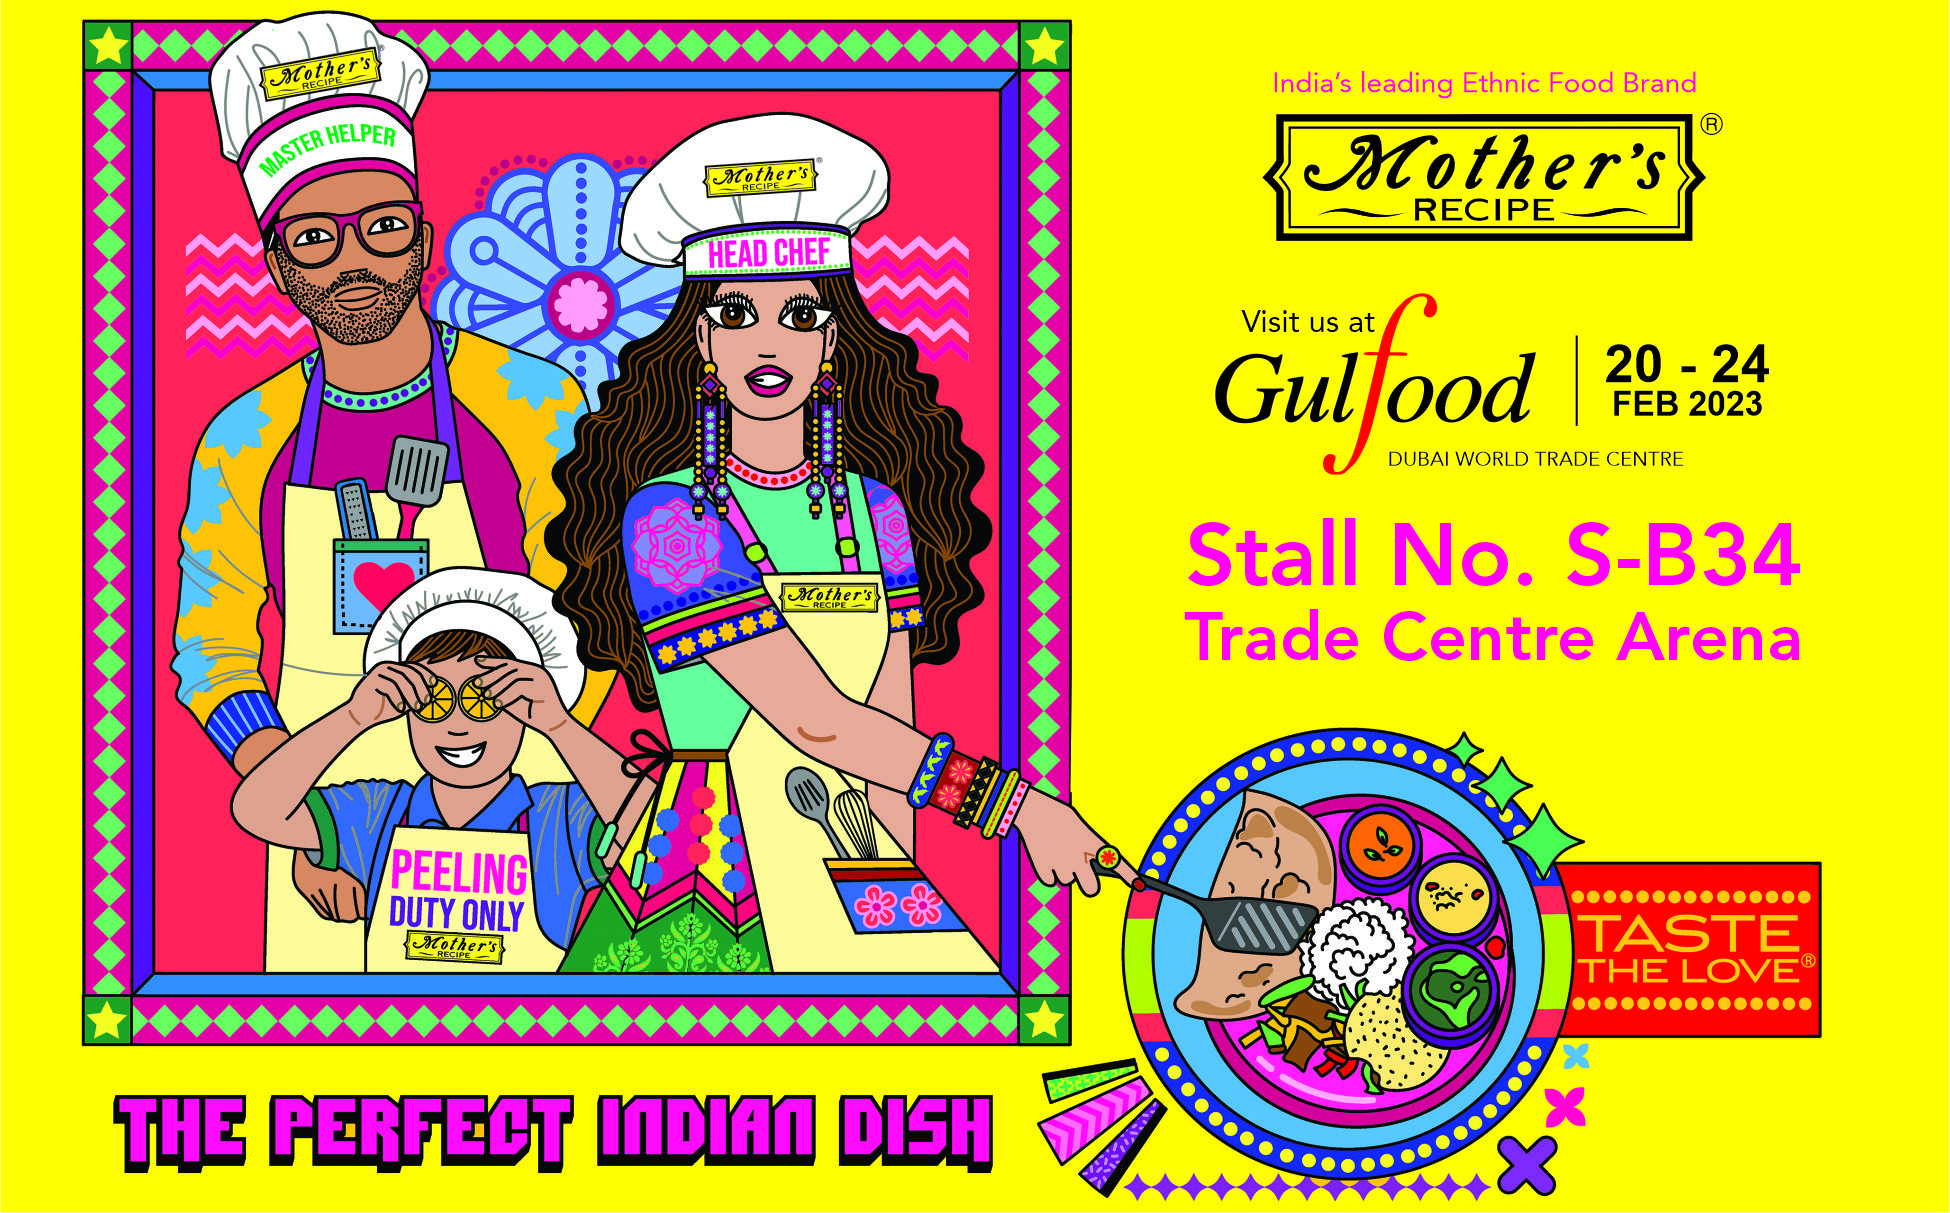 Mother’s Recipe brings a taste of Indian culture to Gulfood 2023 one of the World’s largest Food Exhibition in Dubai, UAE